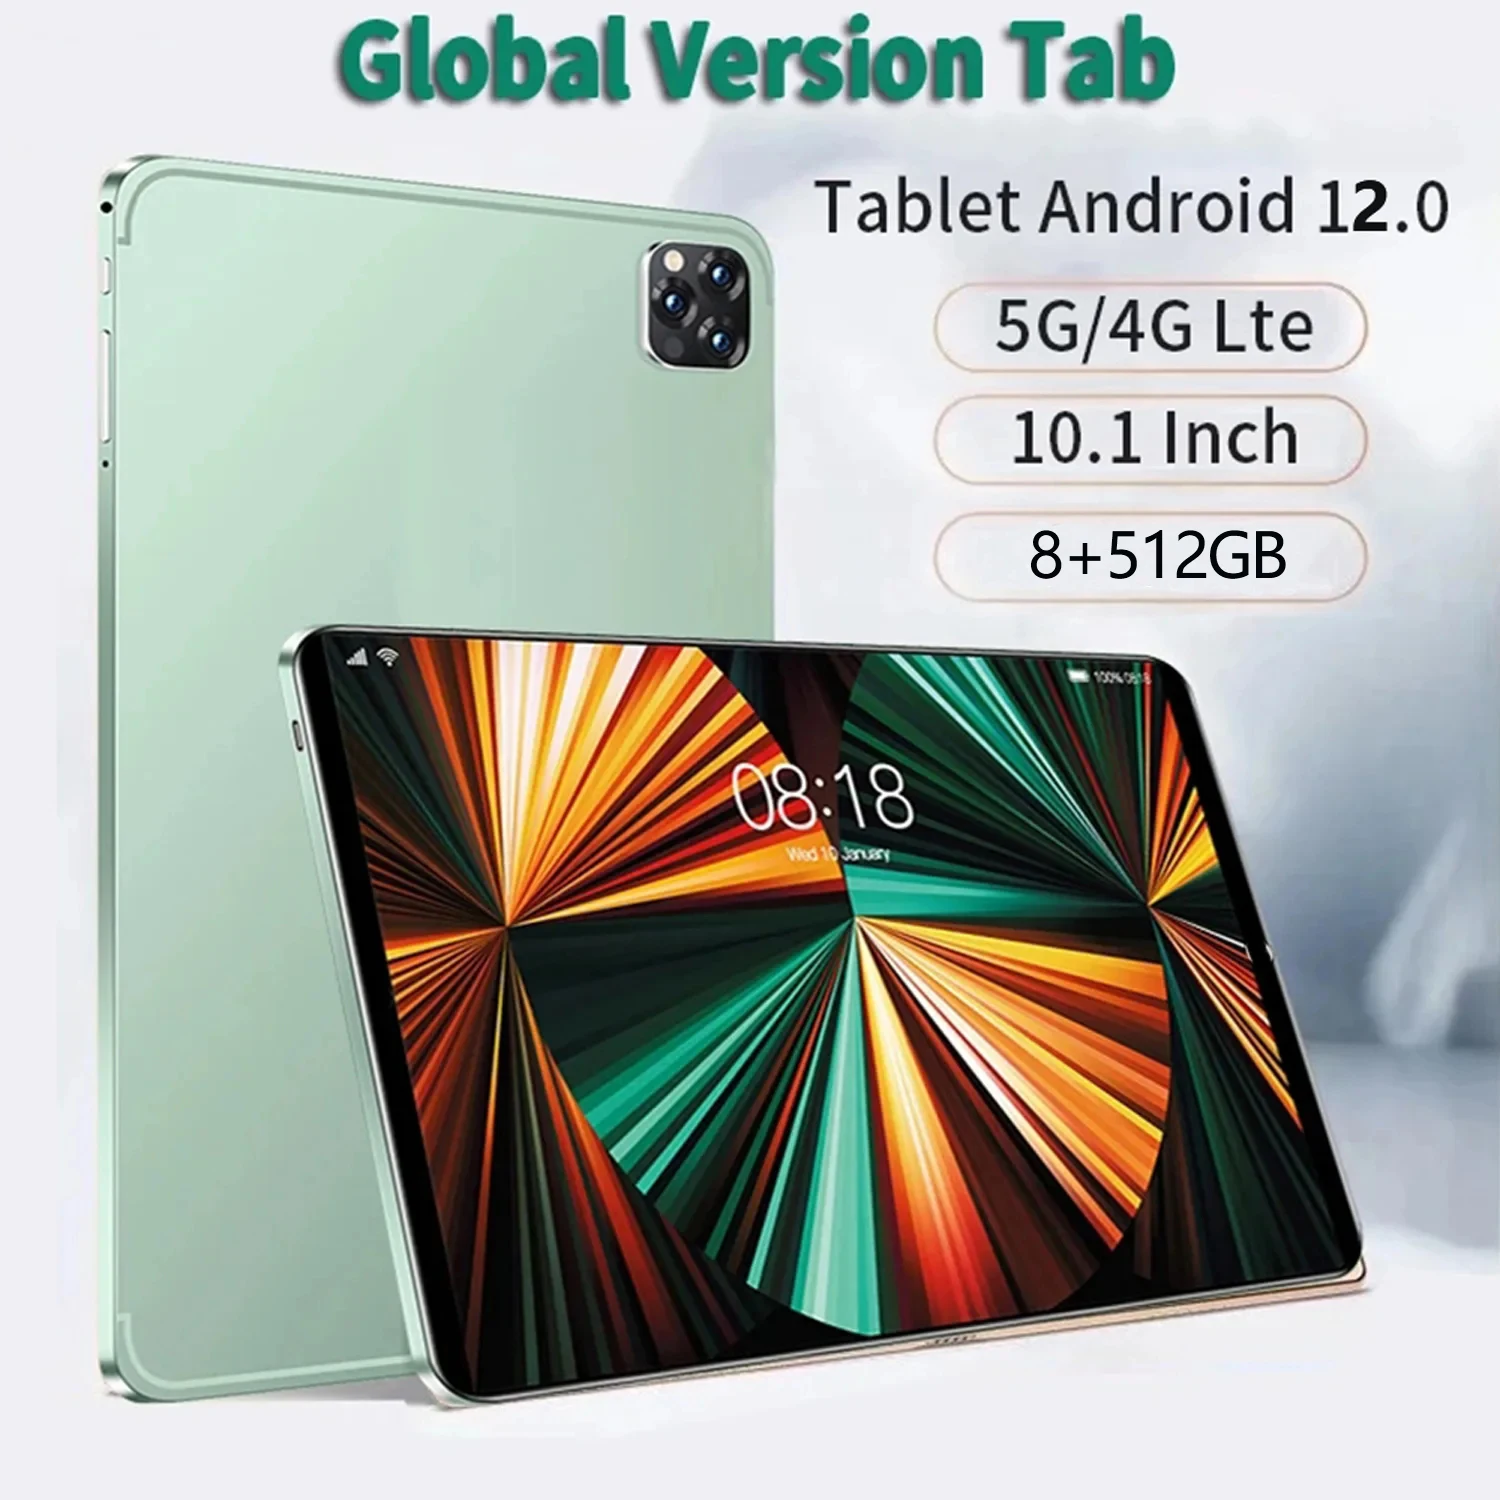 Global Version Tab Original Ram 8GB+512GB 10.1 Inch Android 12 Brand New Dual Sim Card Tablets Support Learning Office Games global version m80 6 7 inch 8gb 512gb 4800mah face fingerprint unlock dual card dual standby